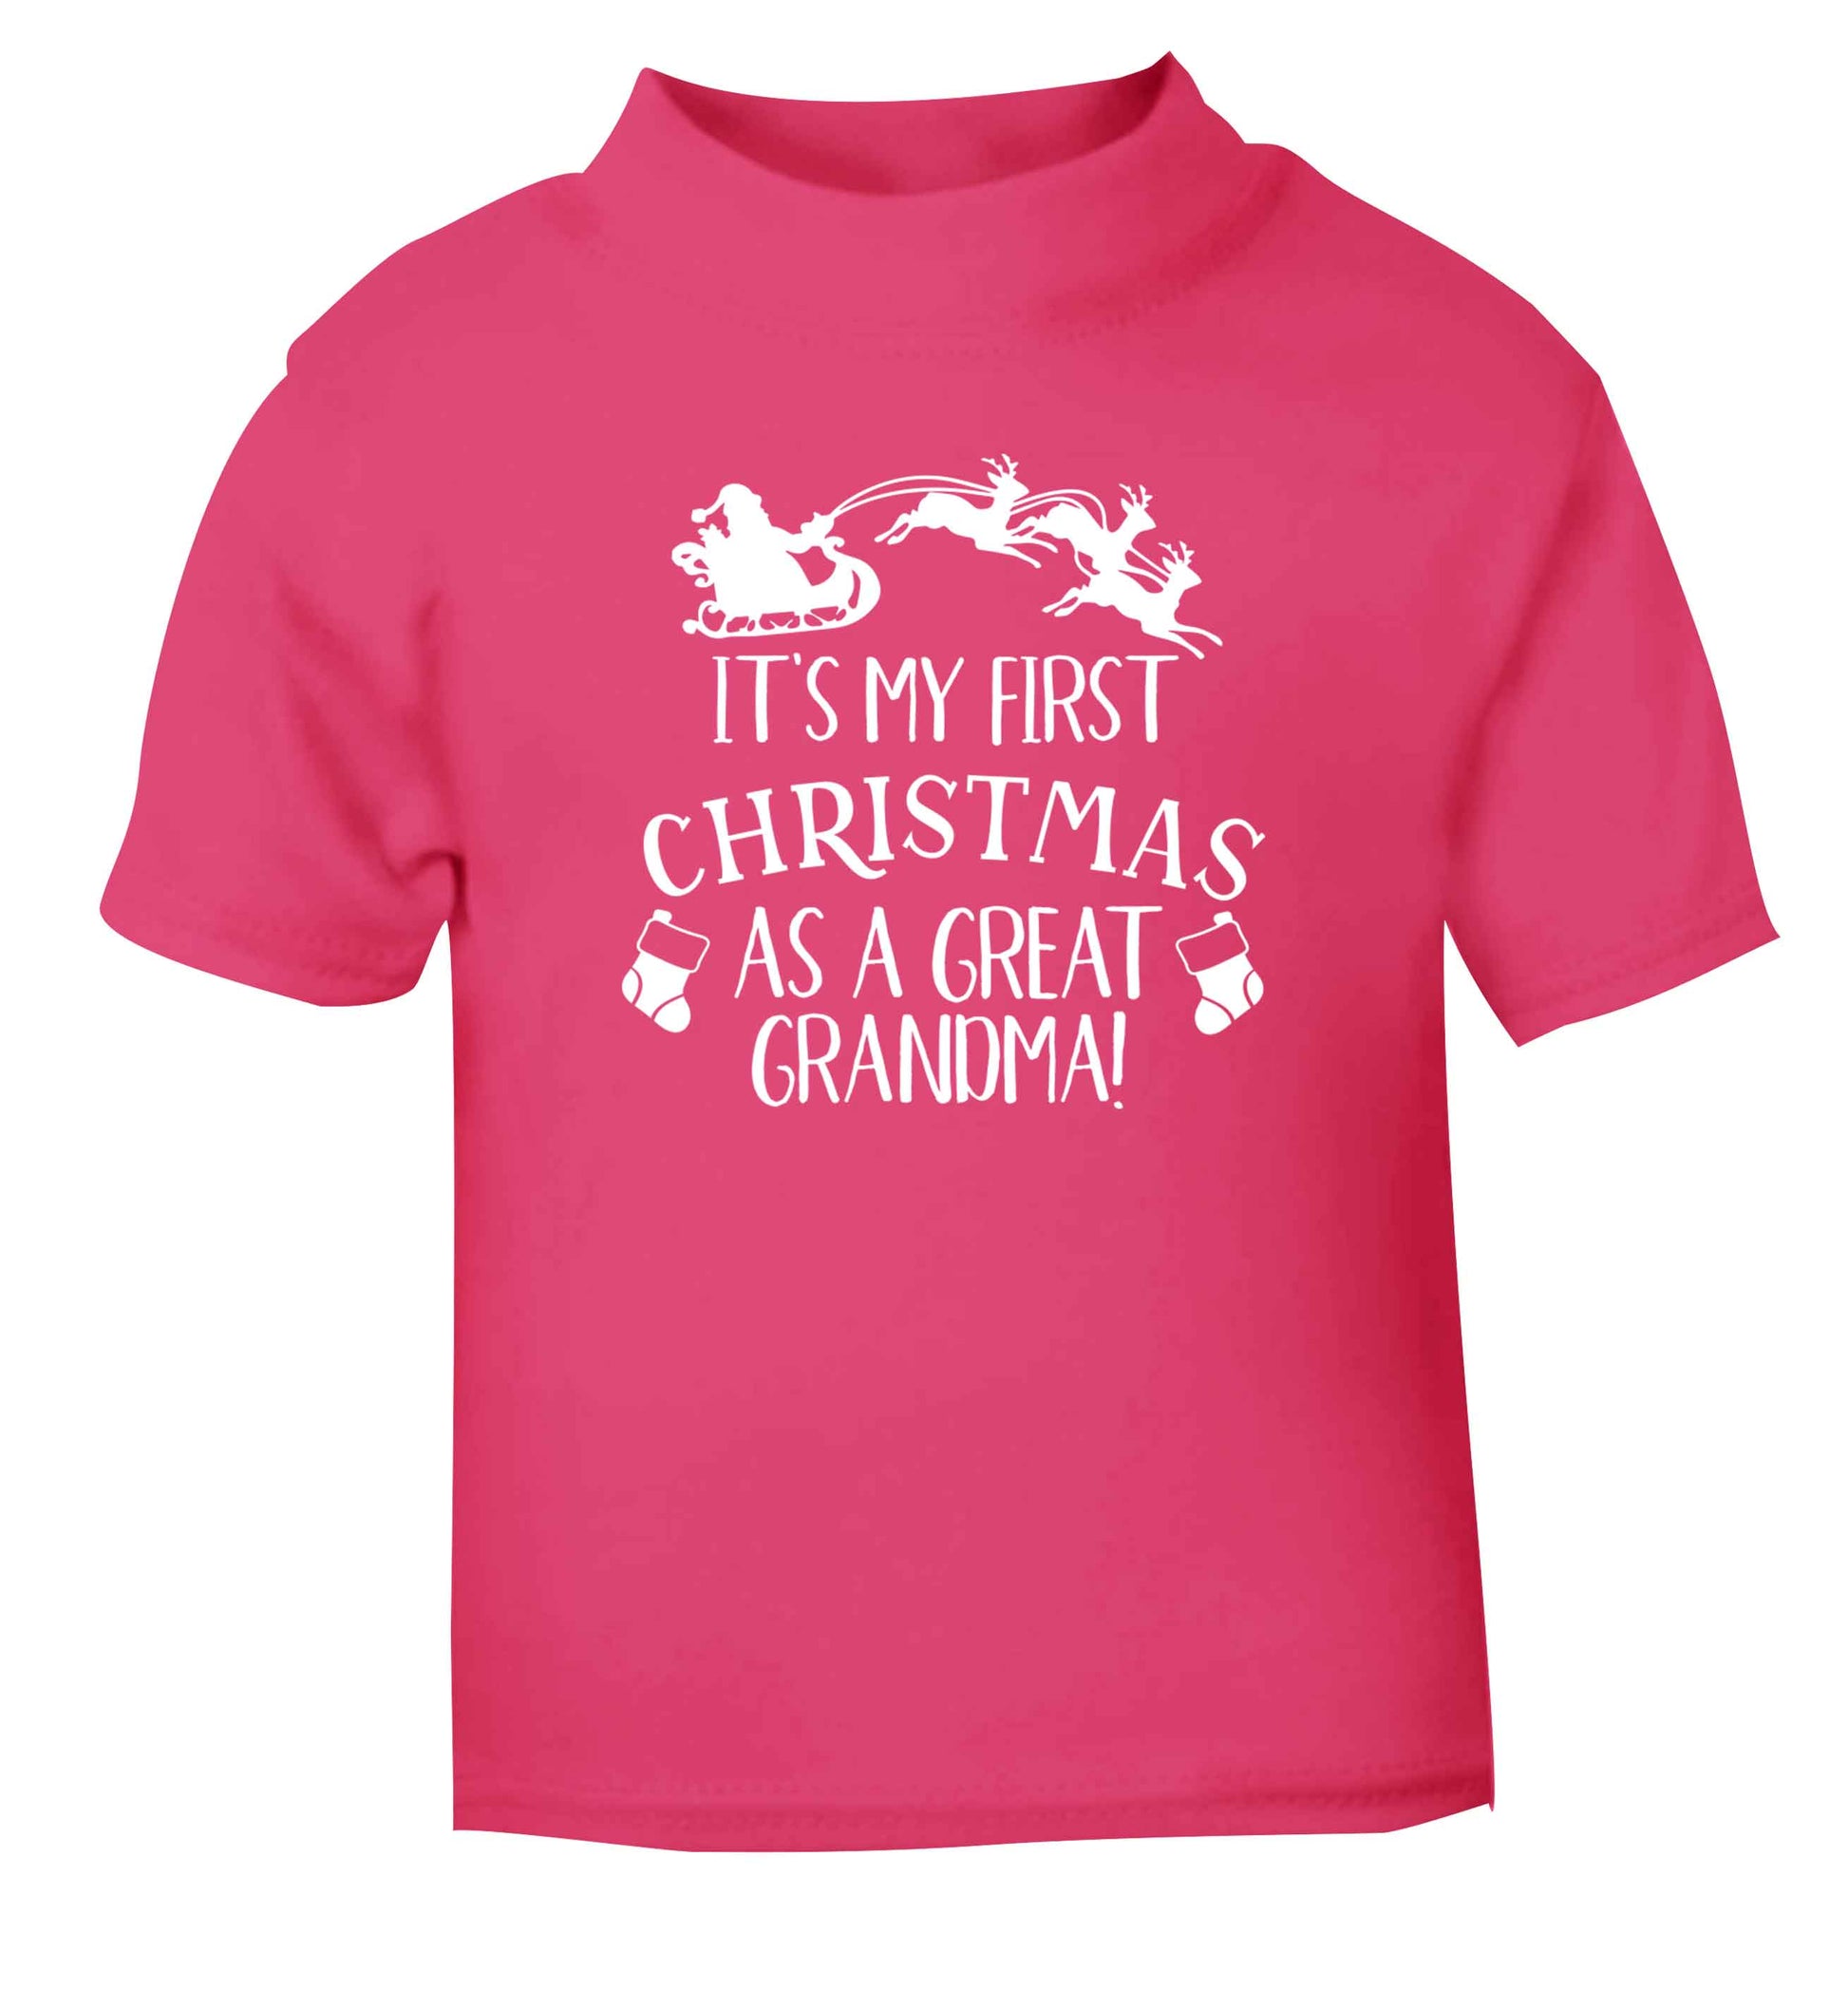 It's my first Christmas as a great grandma! pink Baby Toddler Tshirt 2 Years